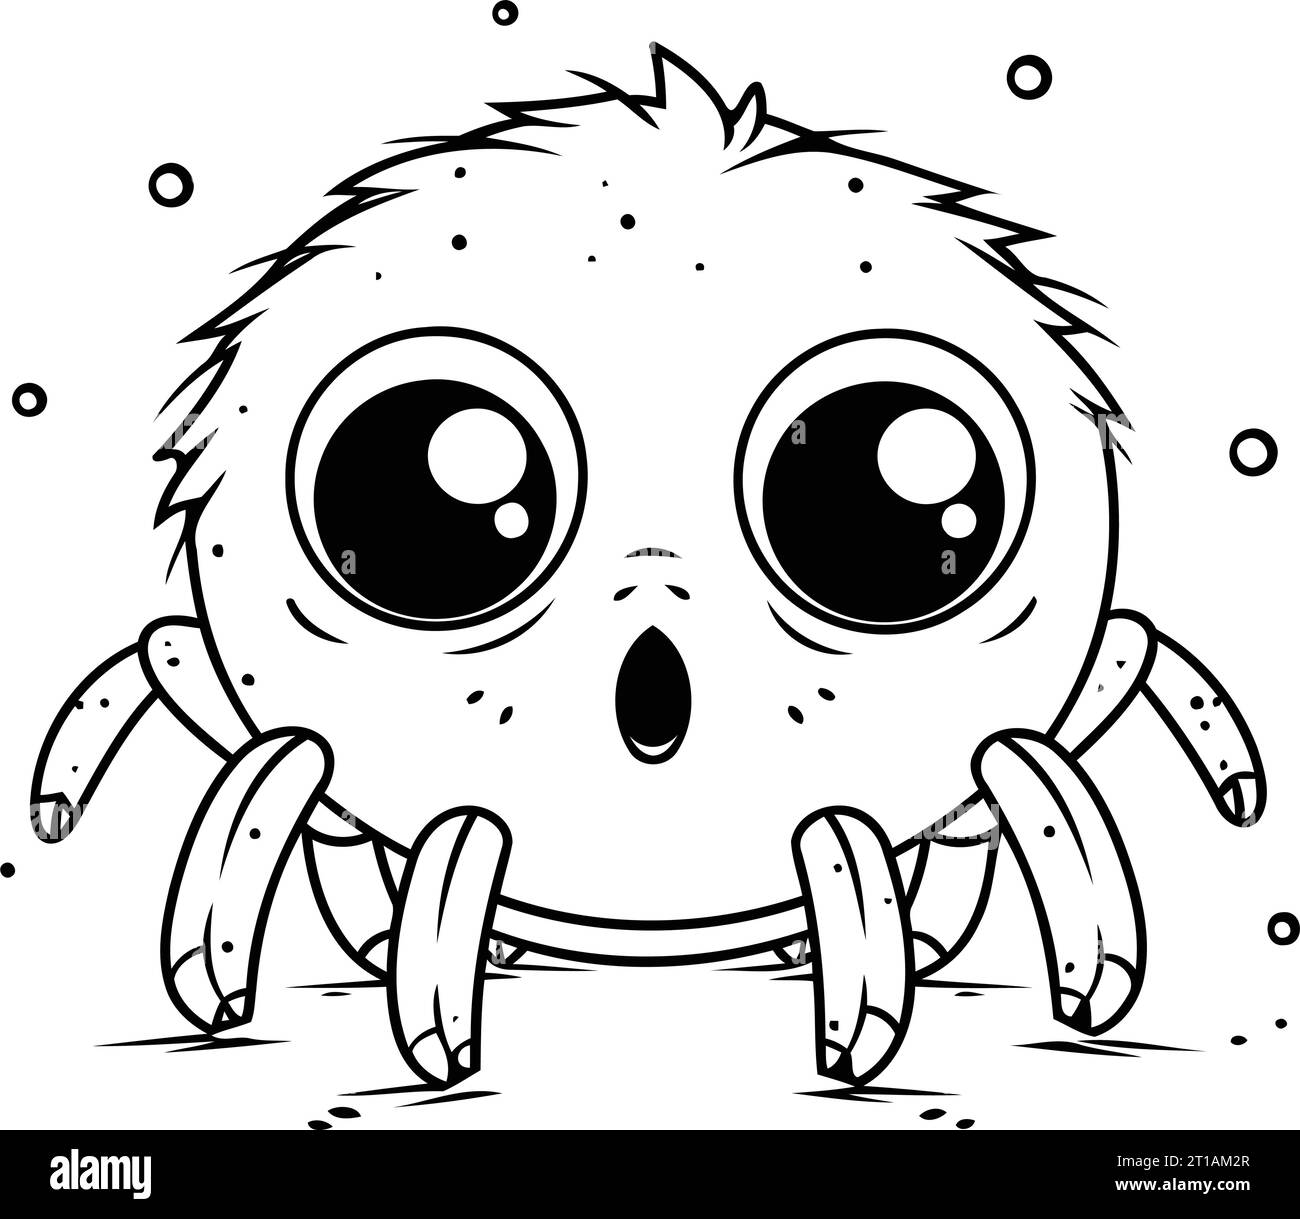 Cute cartoon spider. Vector illustration isolated on a white background ...